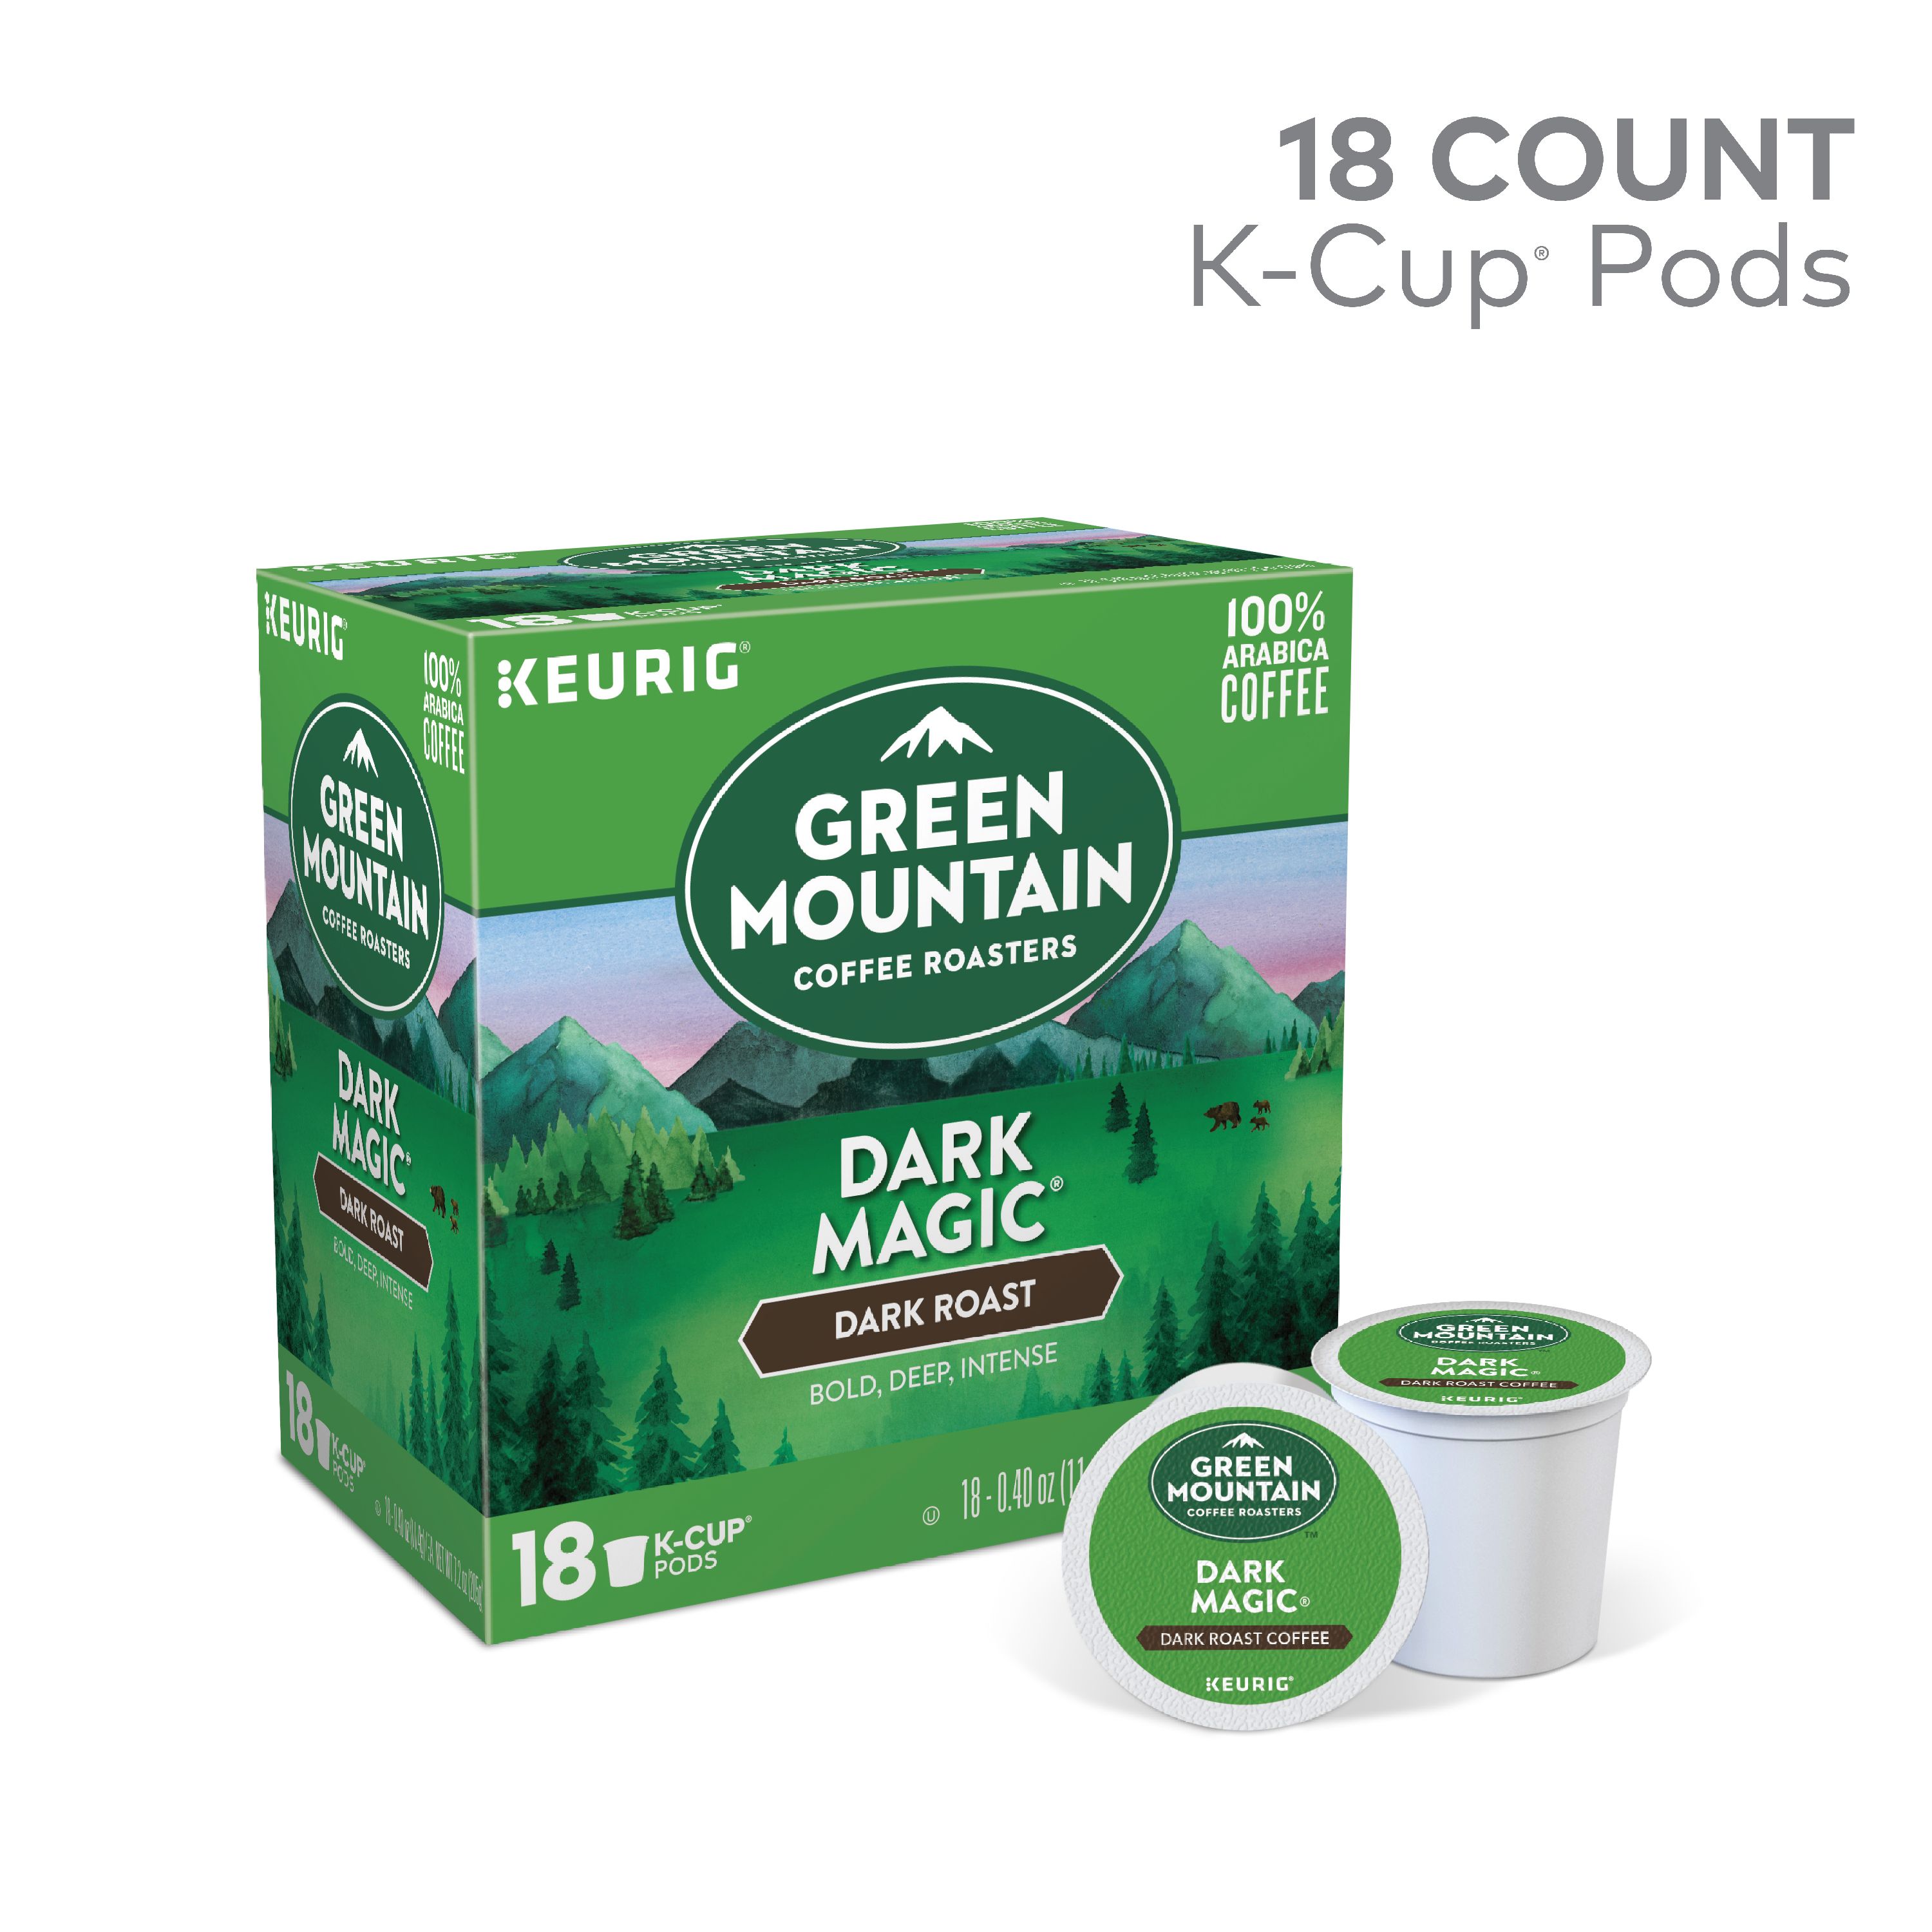 Green Mountain Coffee Dark Magic K-Cup Pods, Dark Roast, 18 Count for Keurig Brewers - image 1 of 9